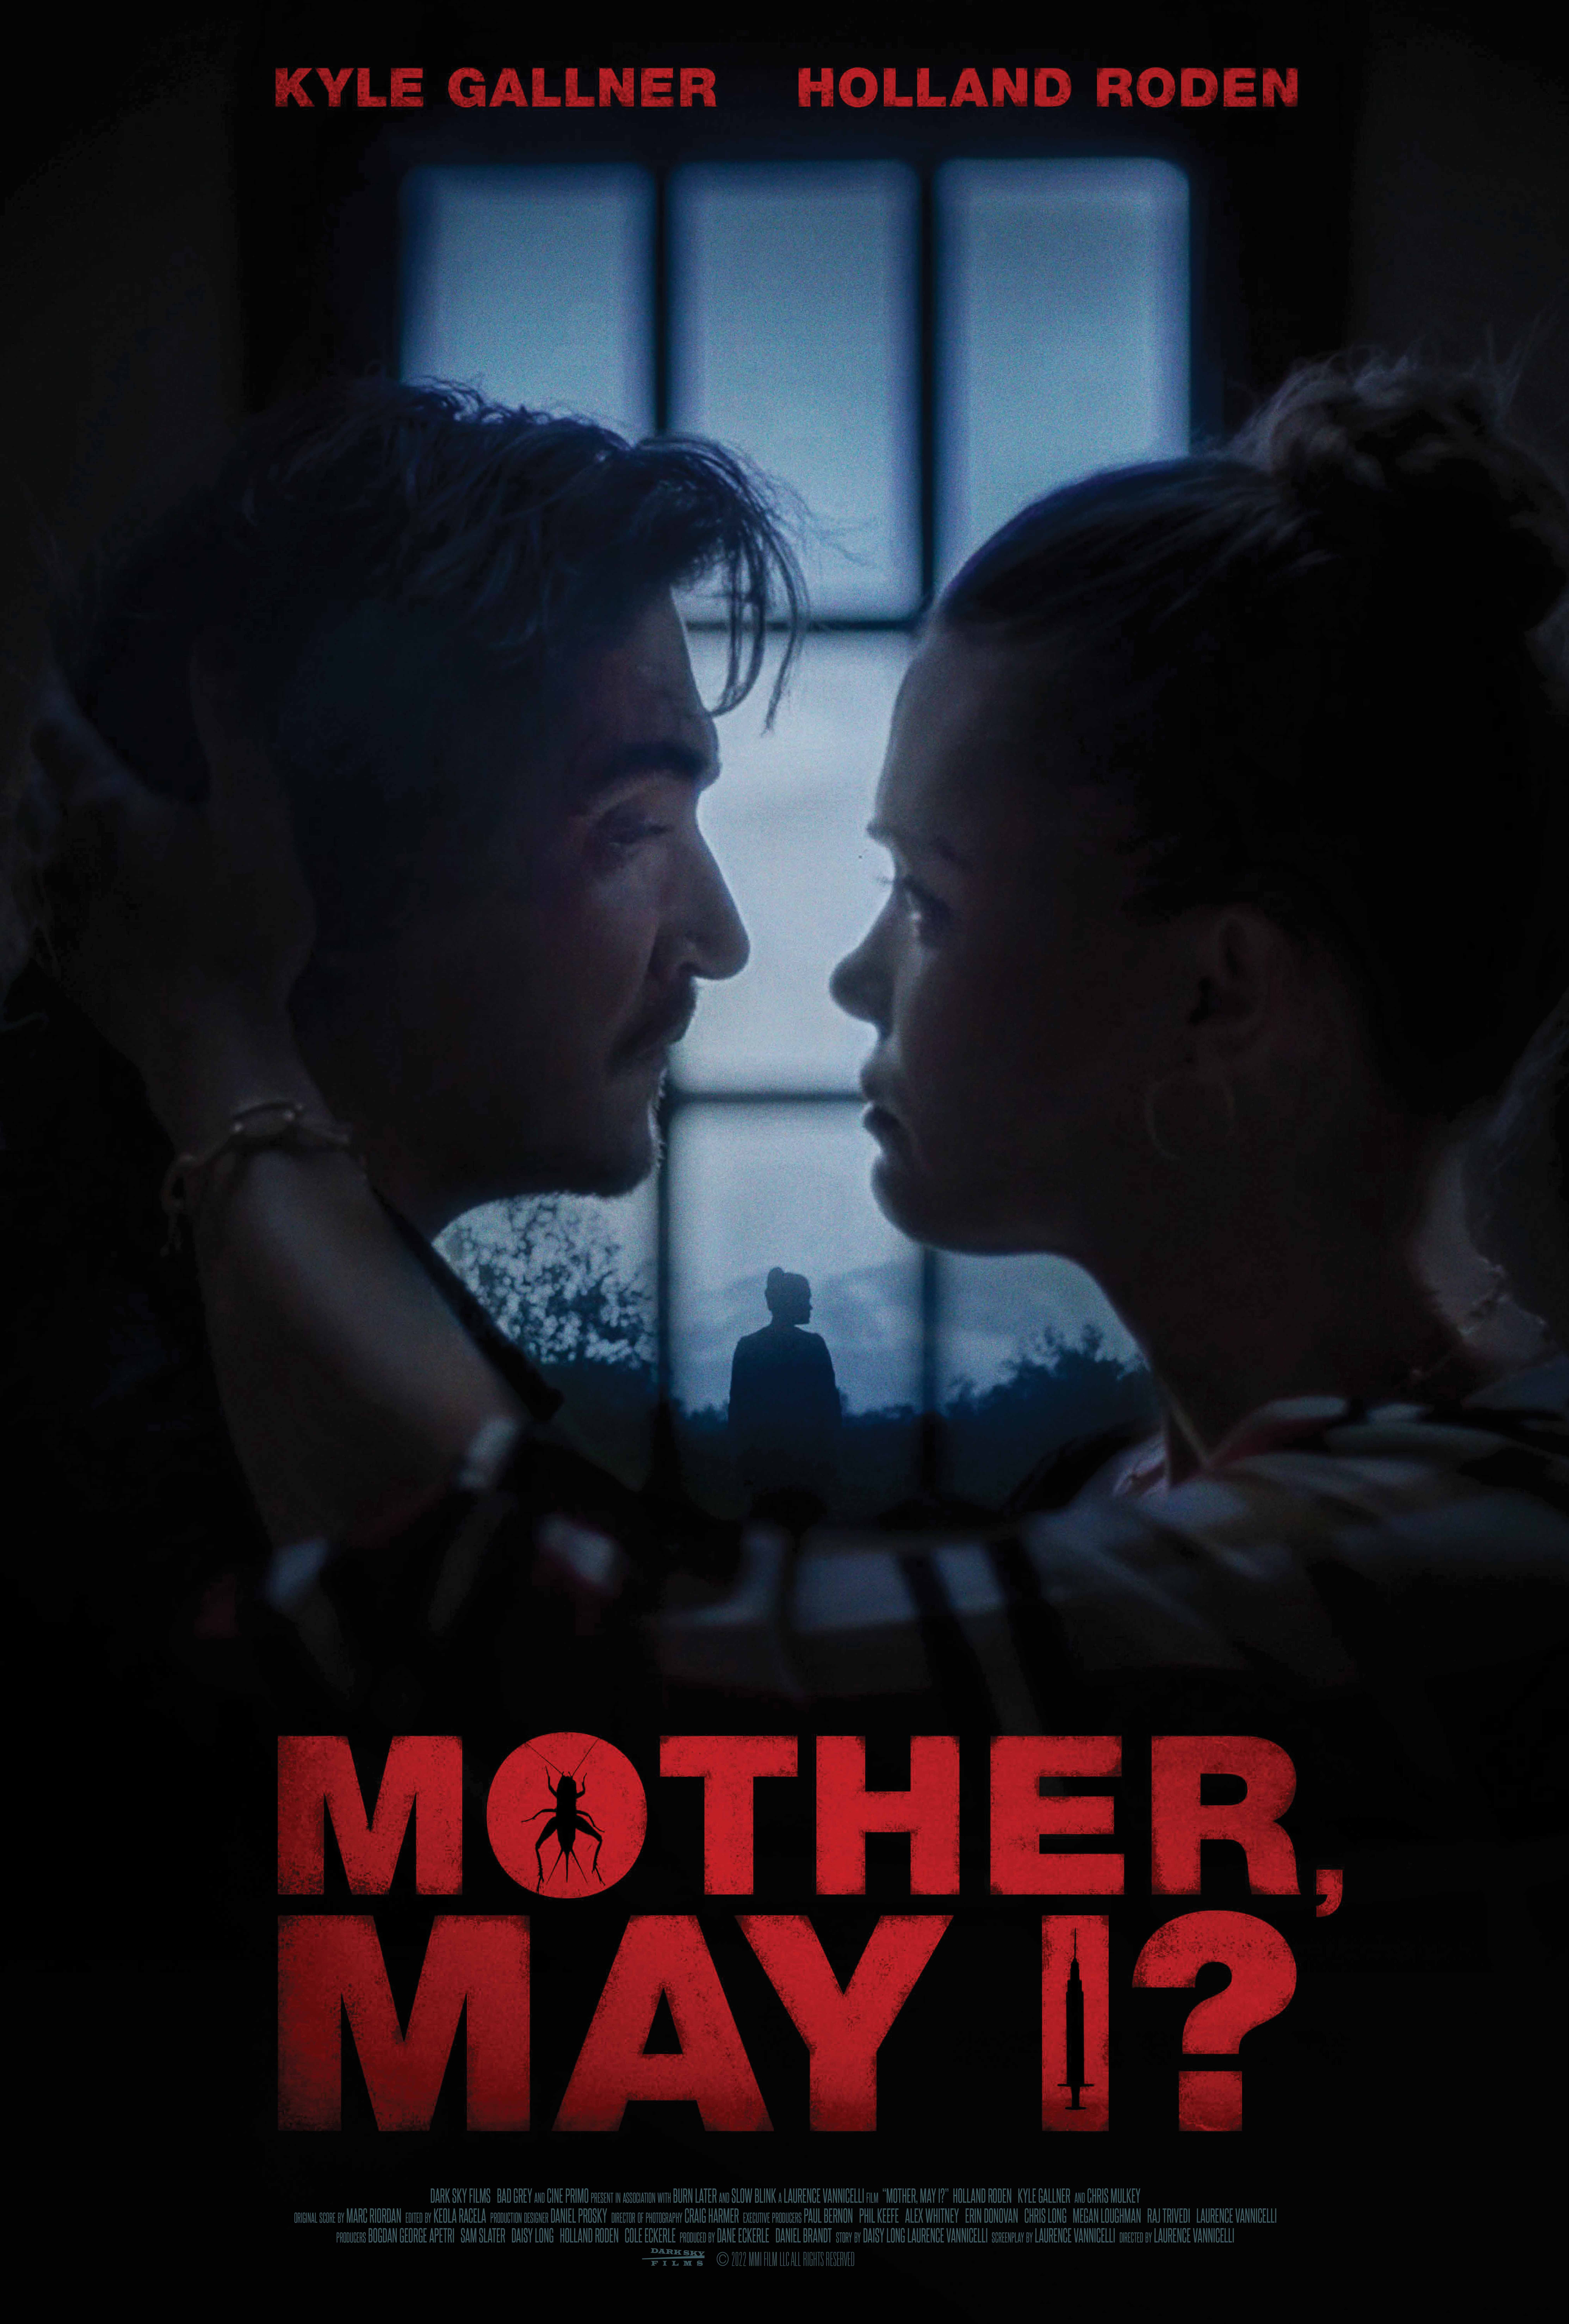 "Mother, May I?" - A Riveting Psychological Thriller Featuring Kyle Gallner and Holland Roden Set to Hit Theaters and VOD on July 21st 22